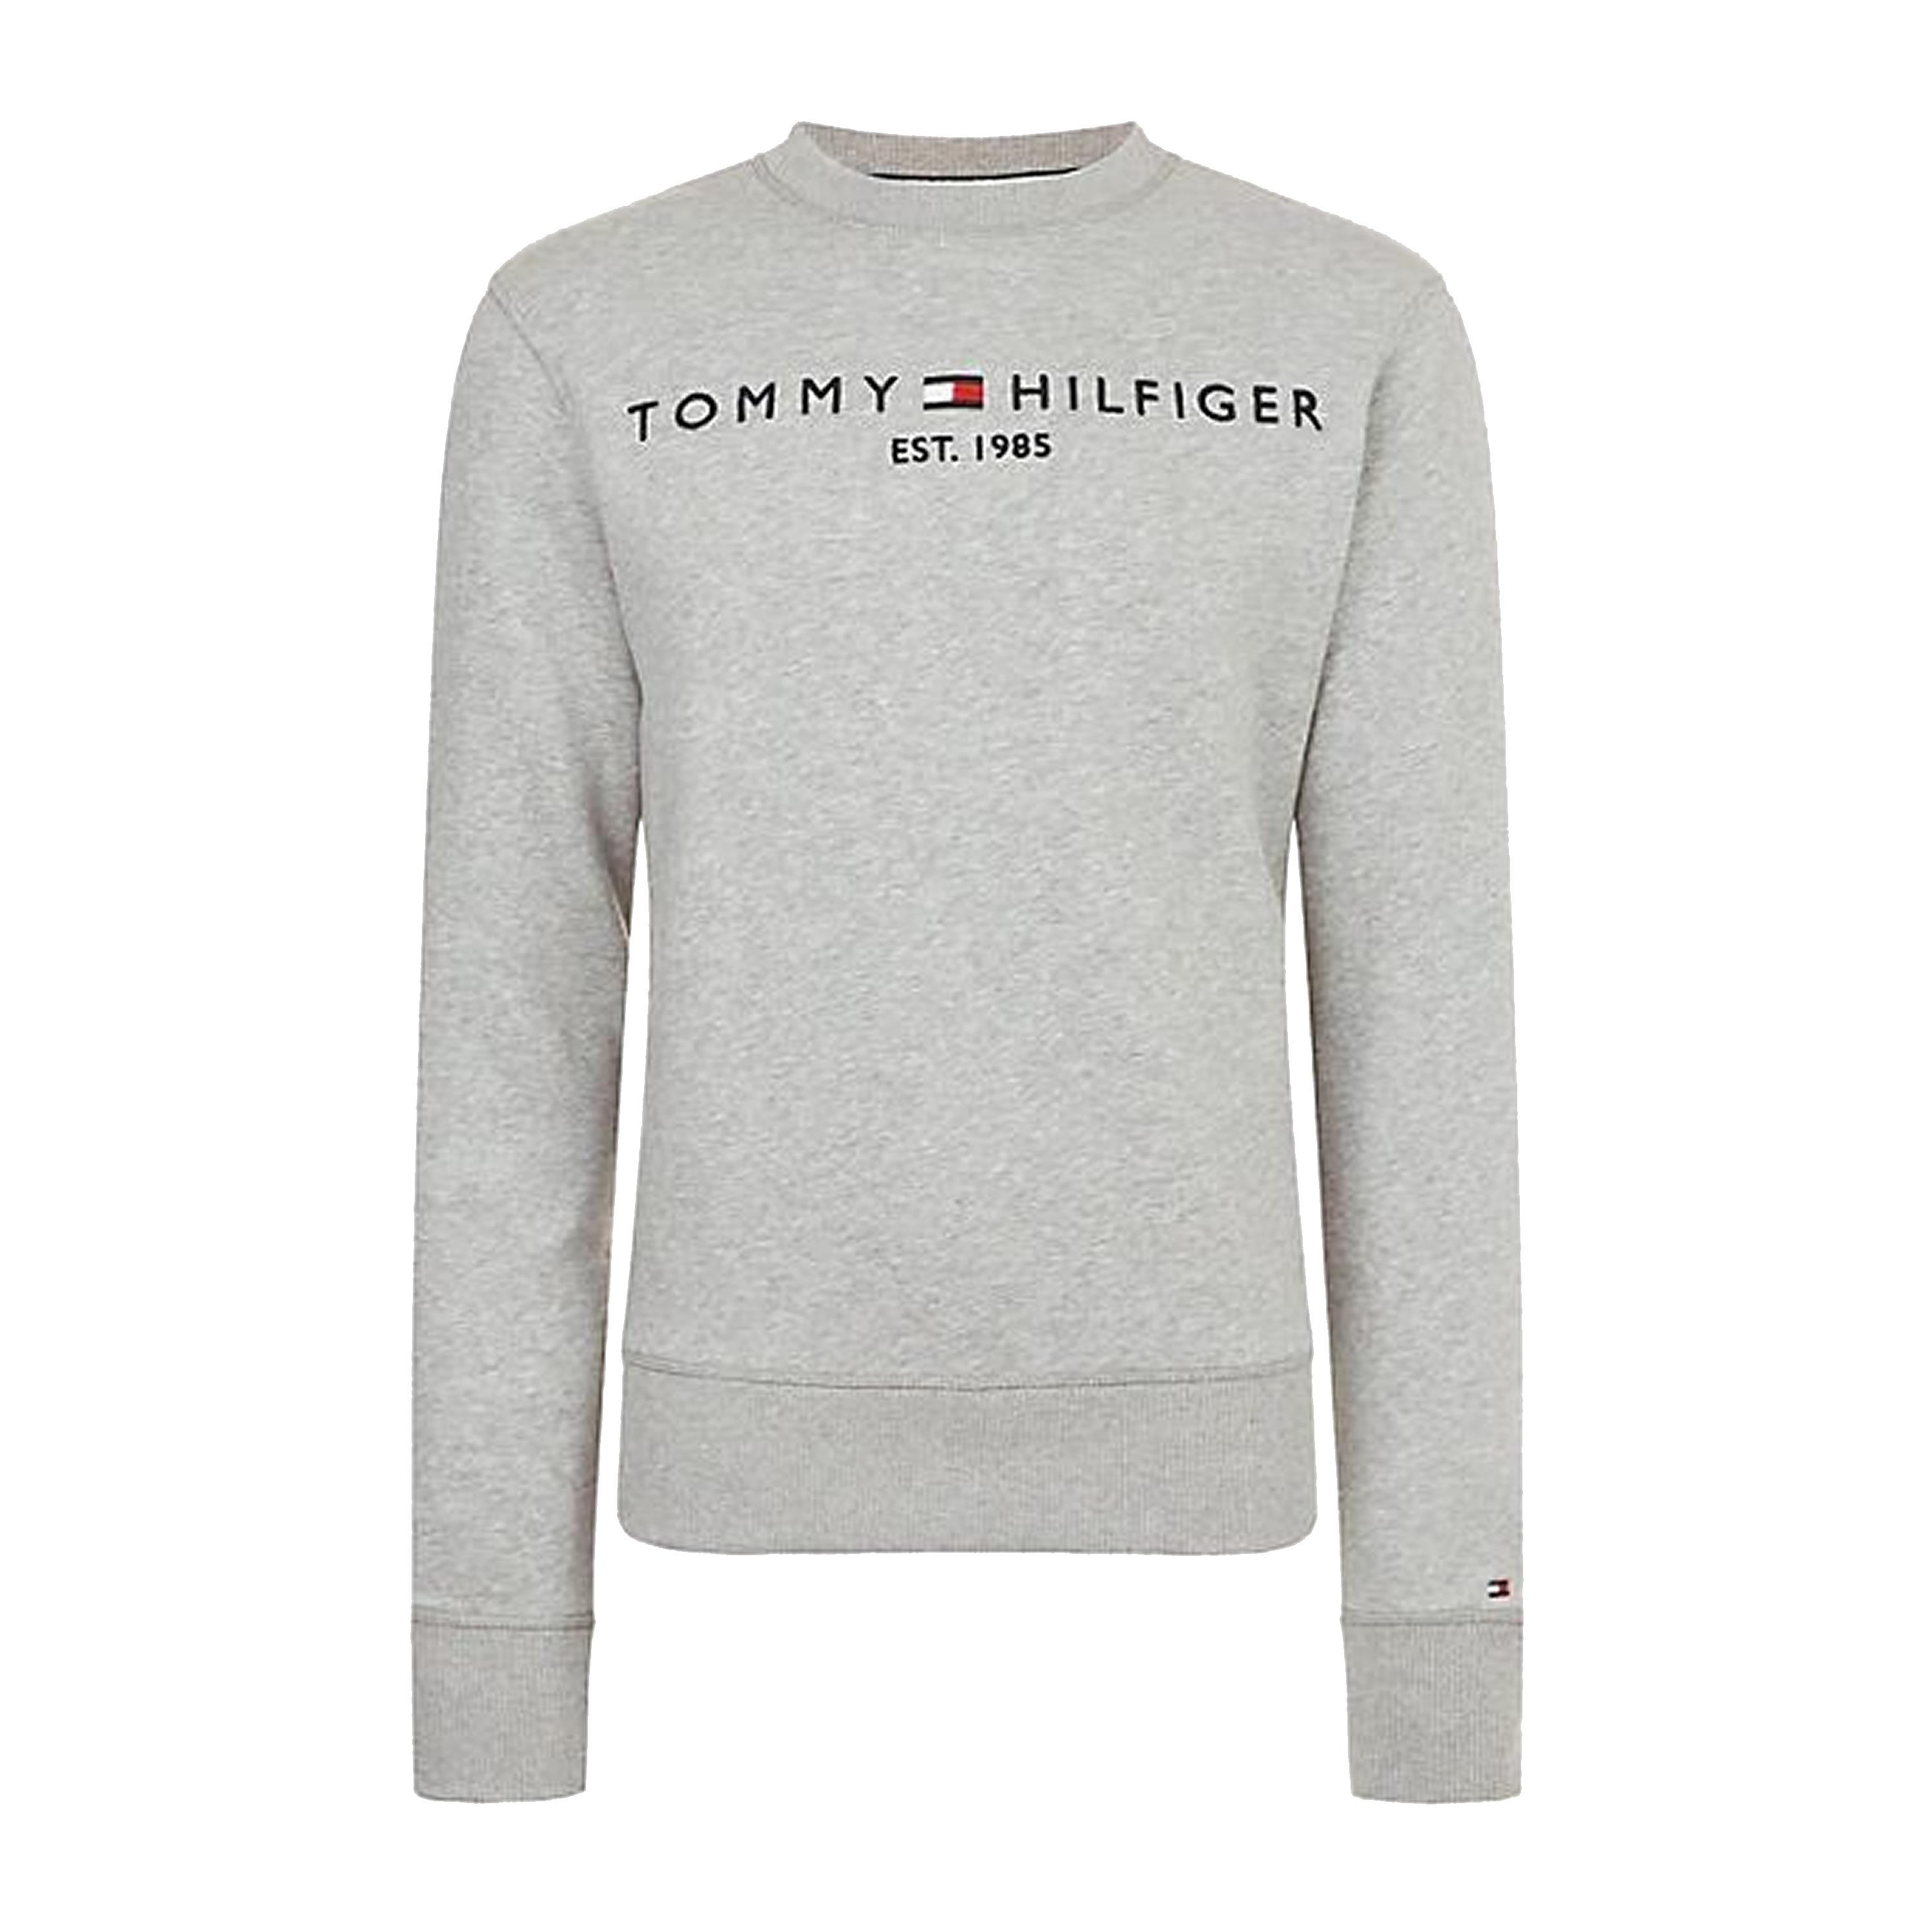 Tommy Hilfiger Logo Sweater in Gray for Men - Lyst